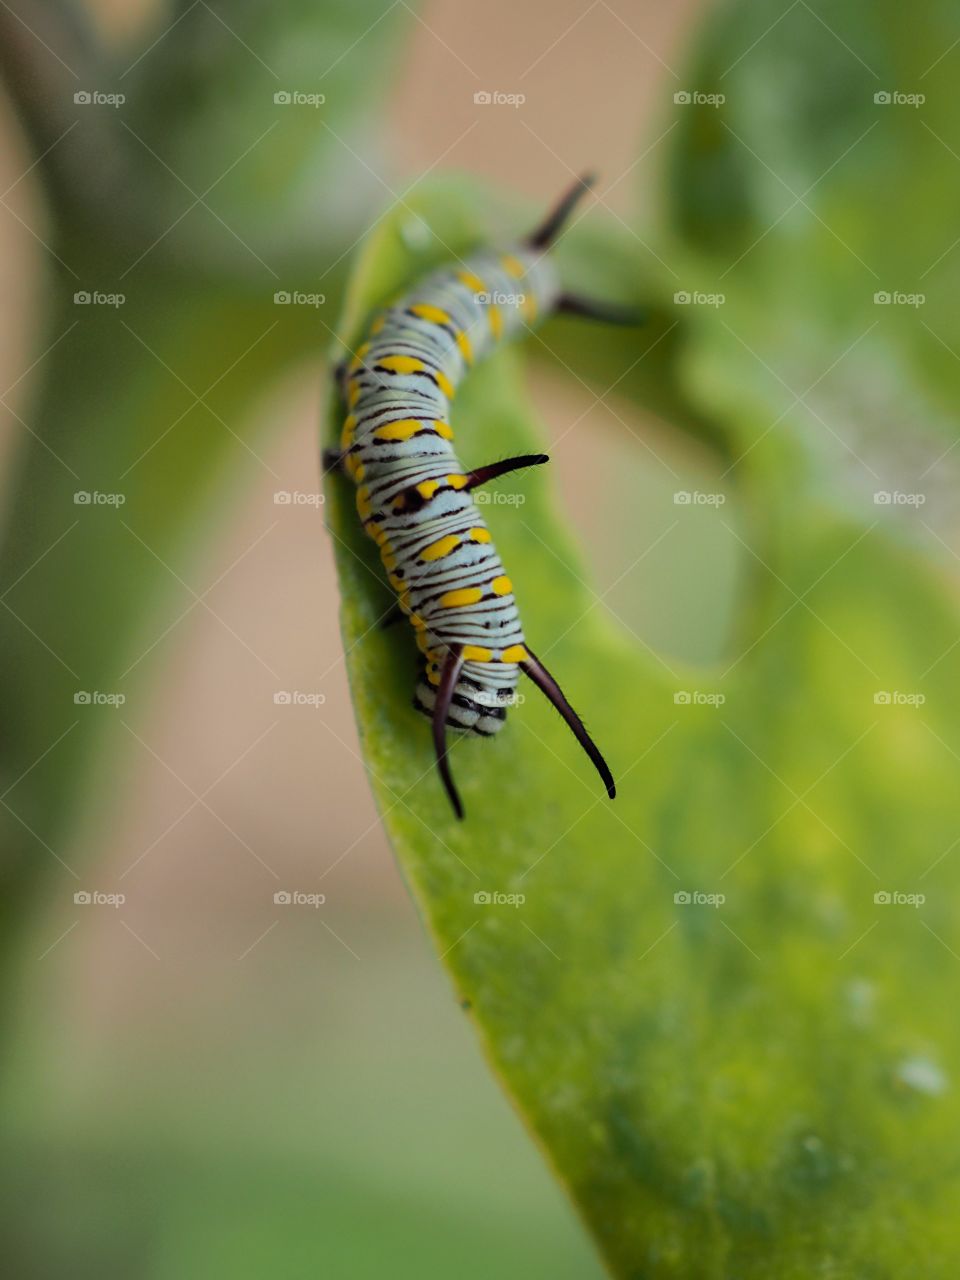 Insect, Butterfly, Caterpillar, Wildlife, Larva